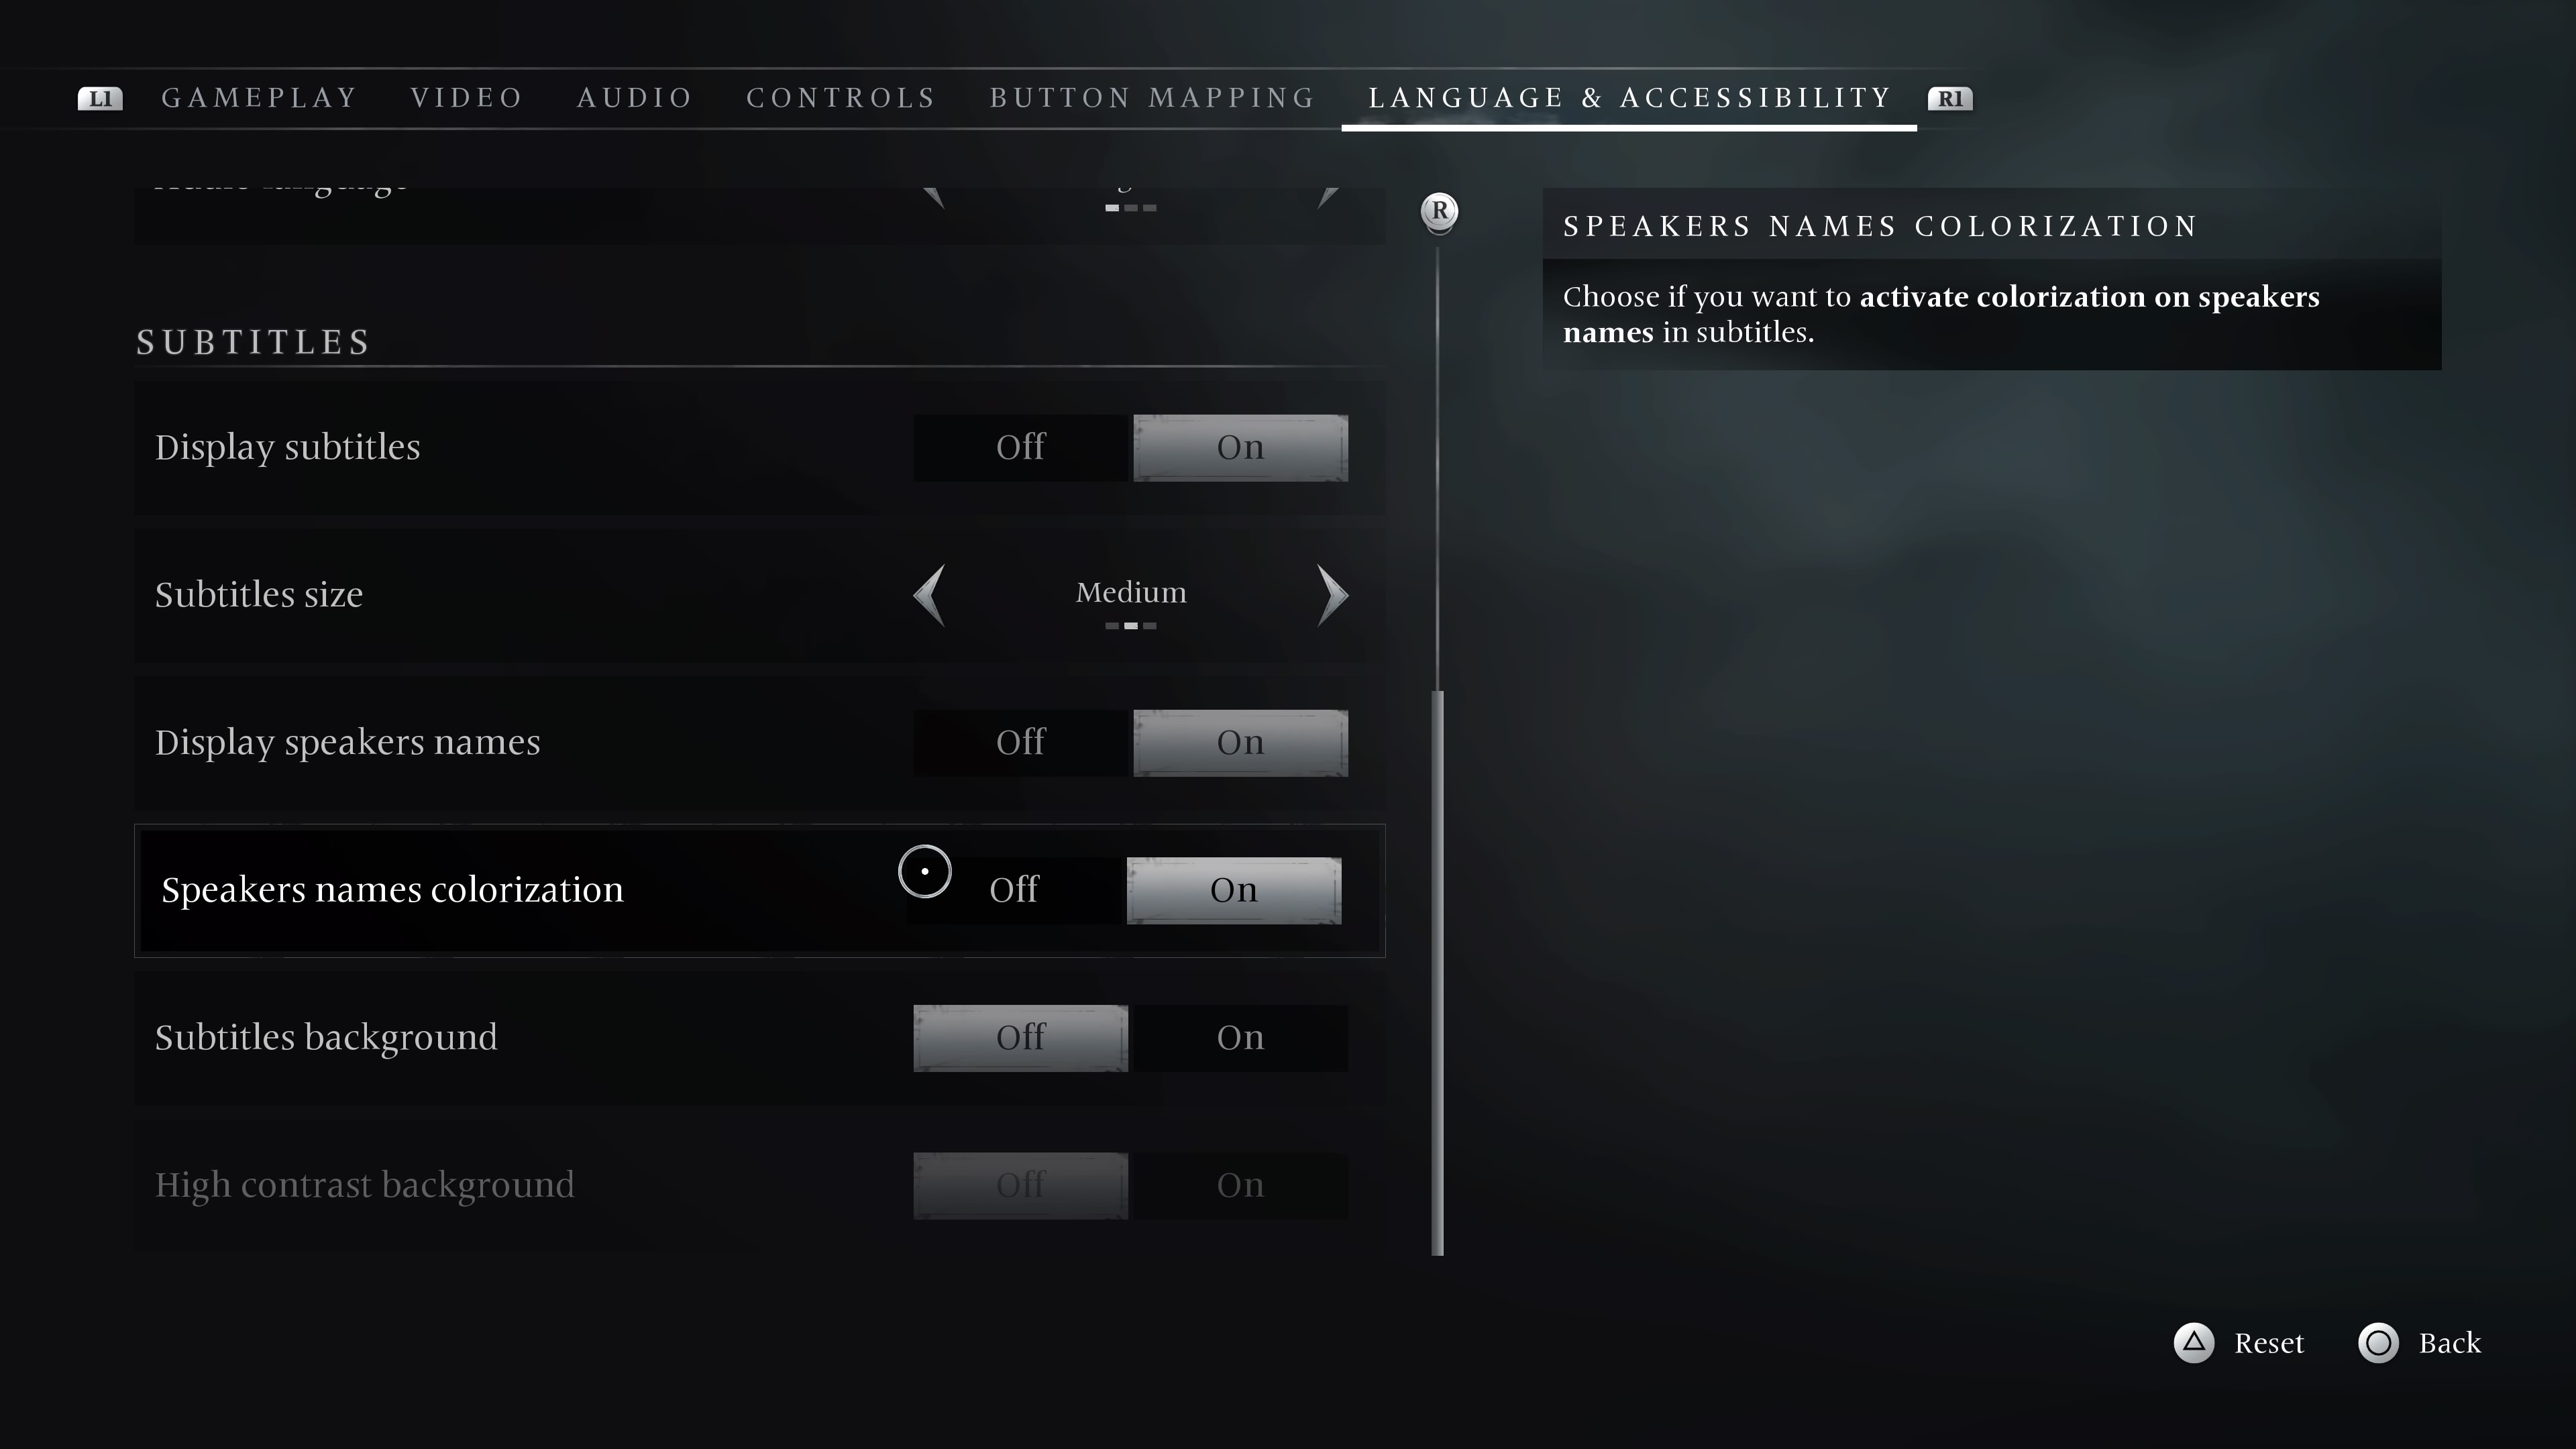 The game's accessibility settings menu.